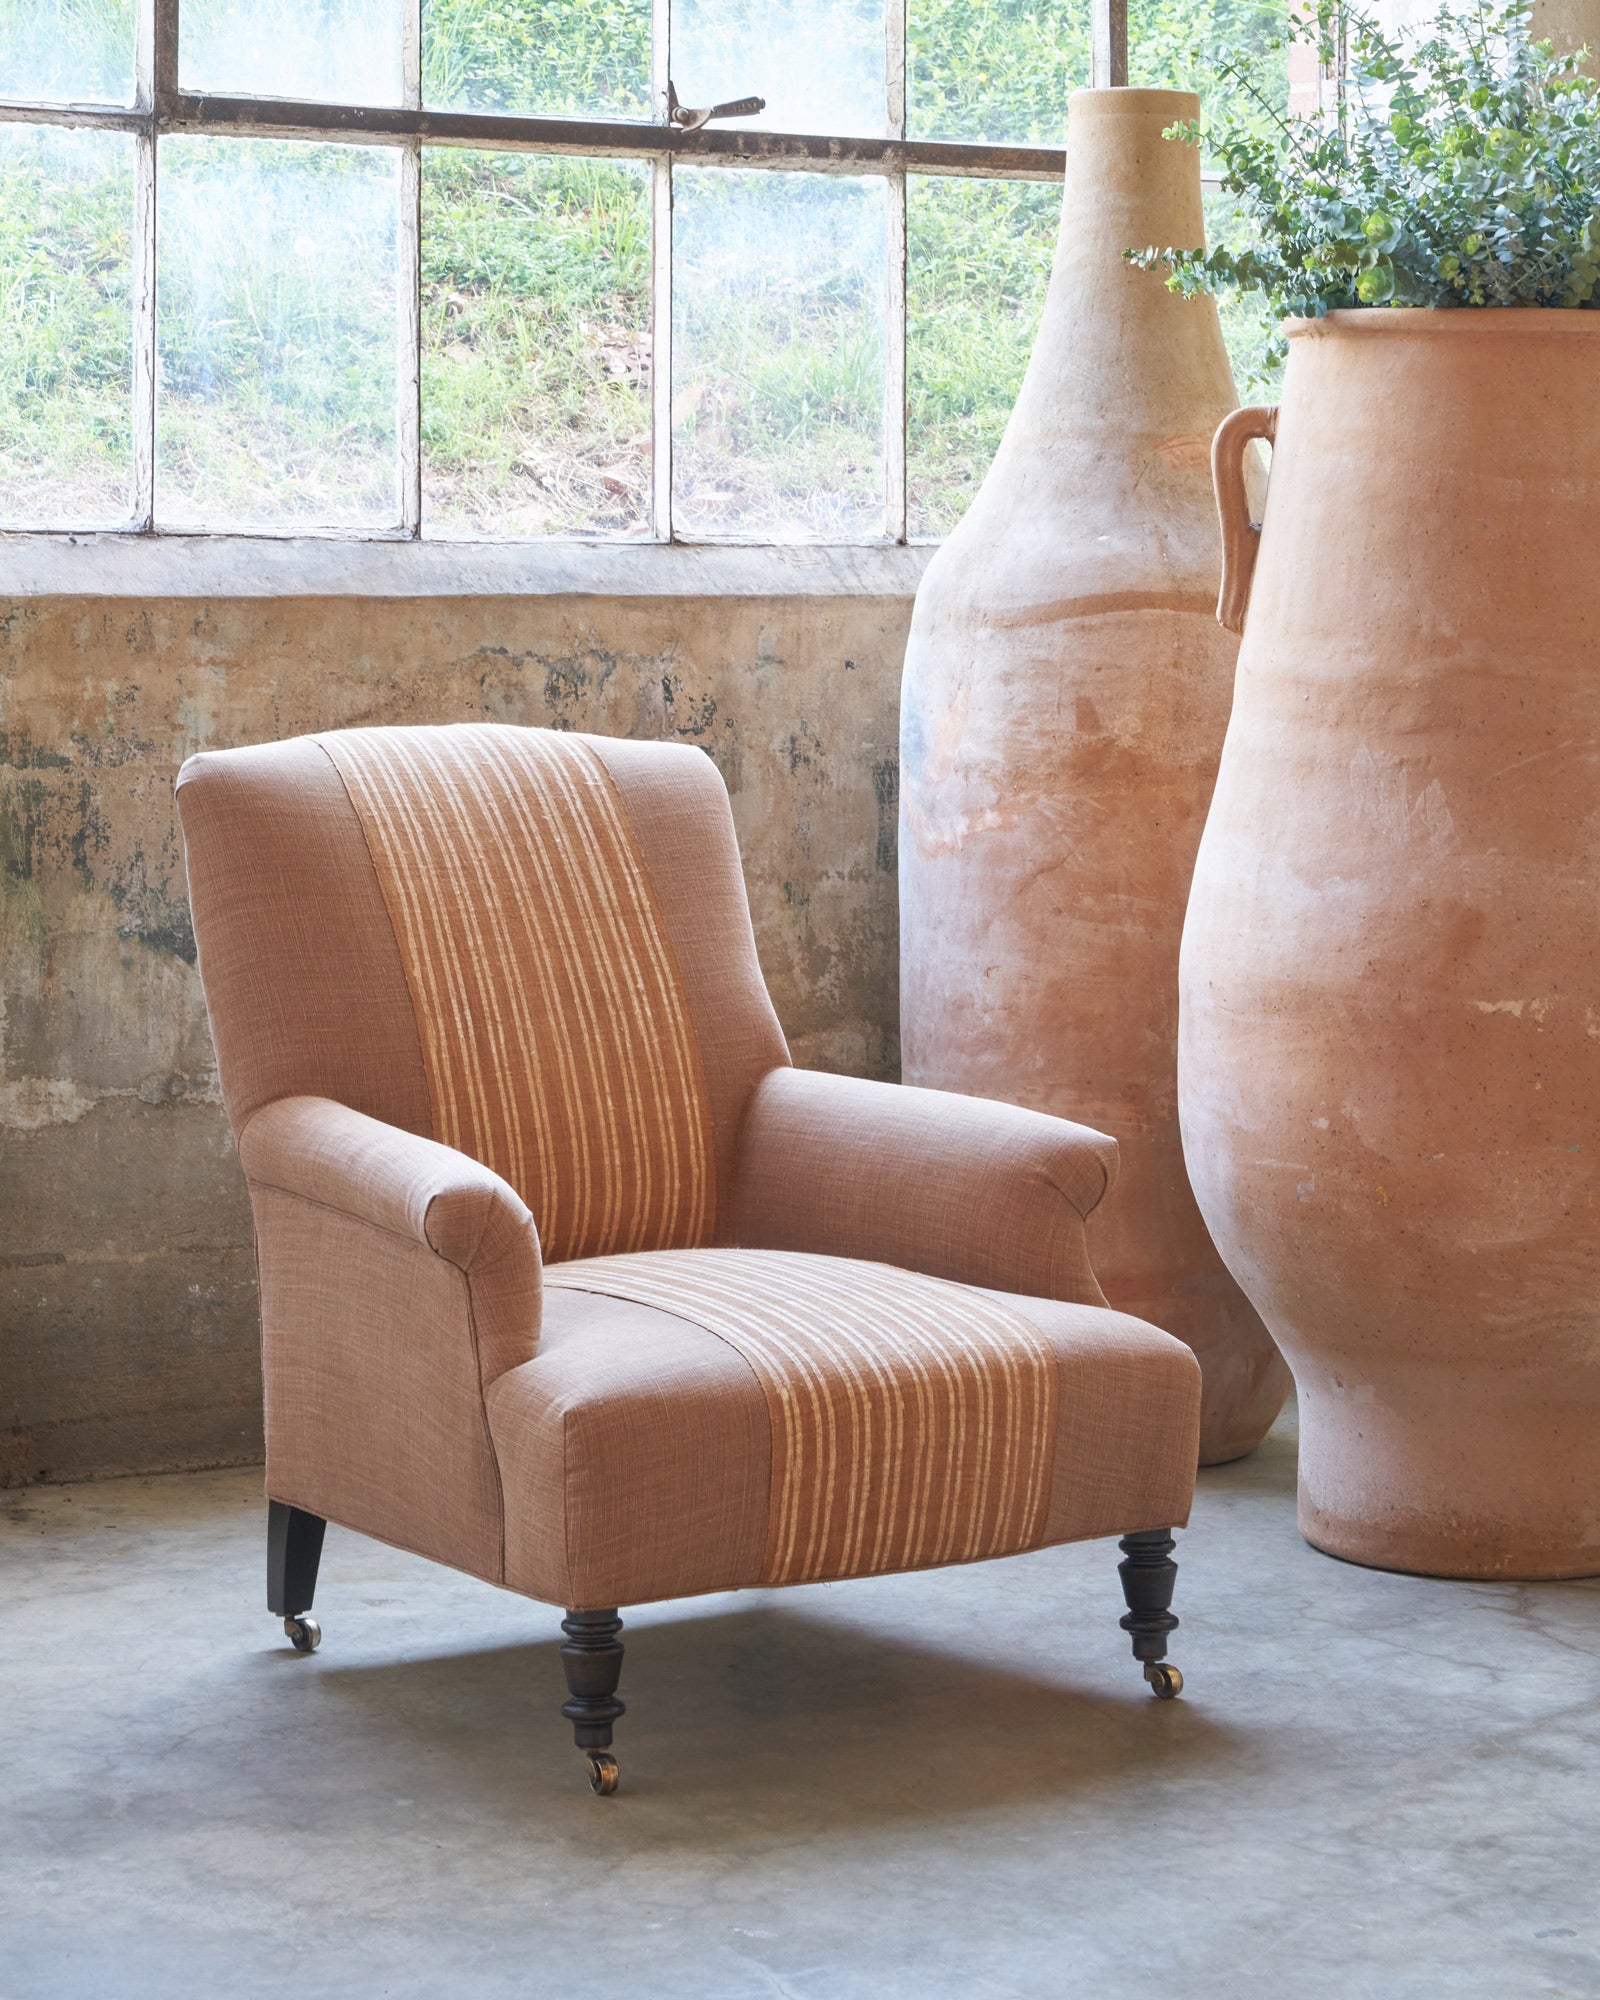  Brown chair next to large terracotta pots. Photographed in Rye Spice. 